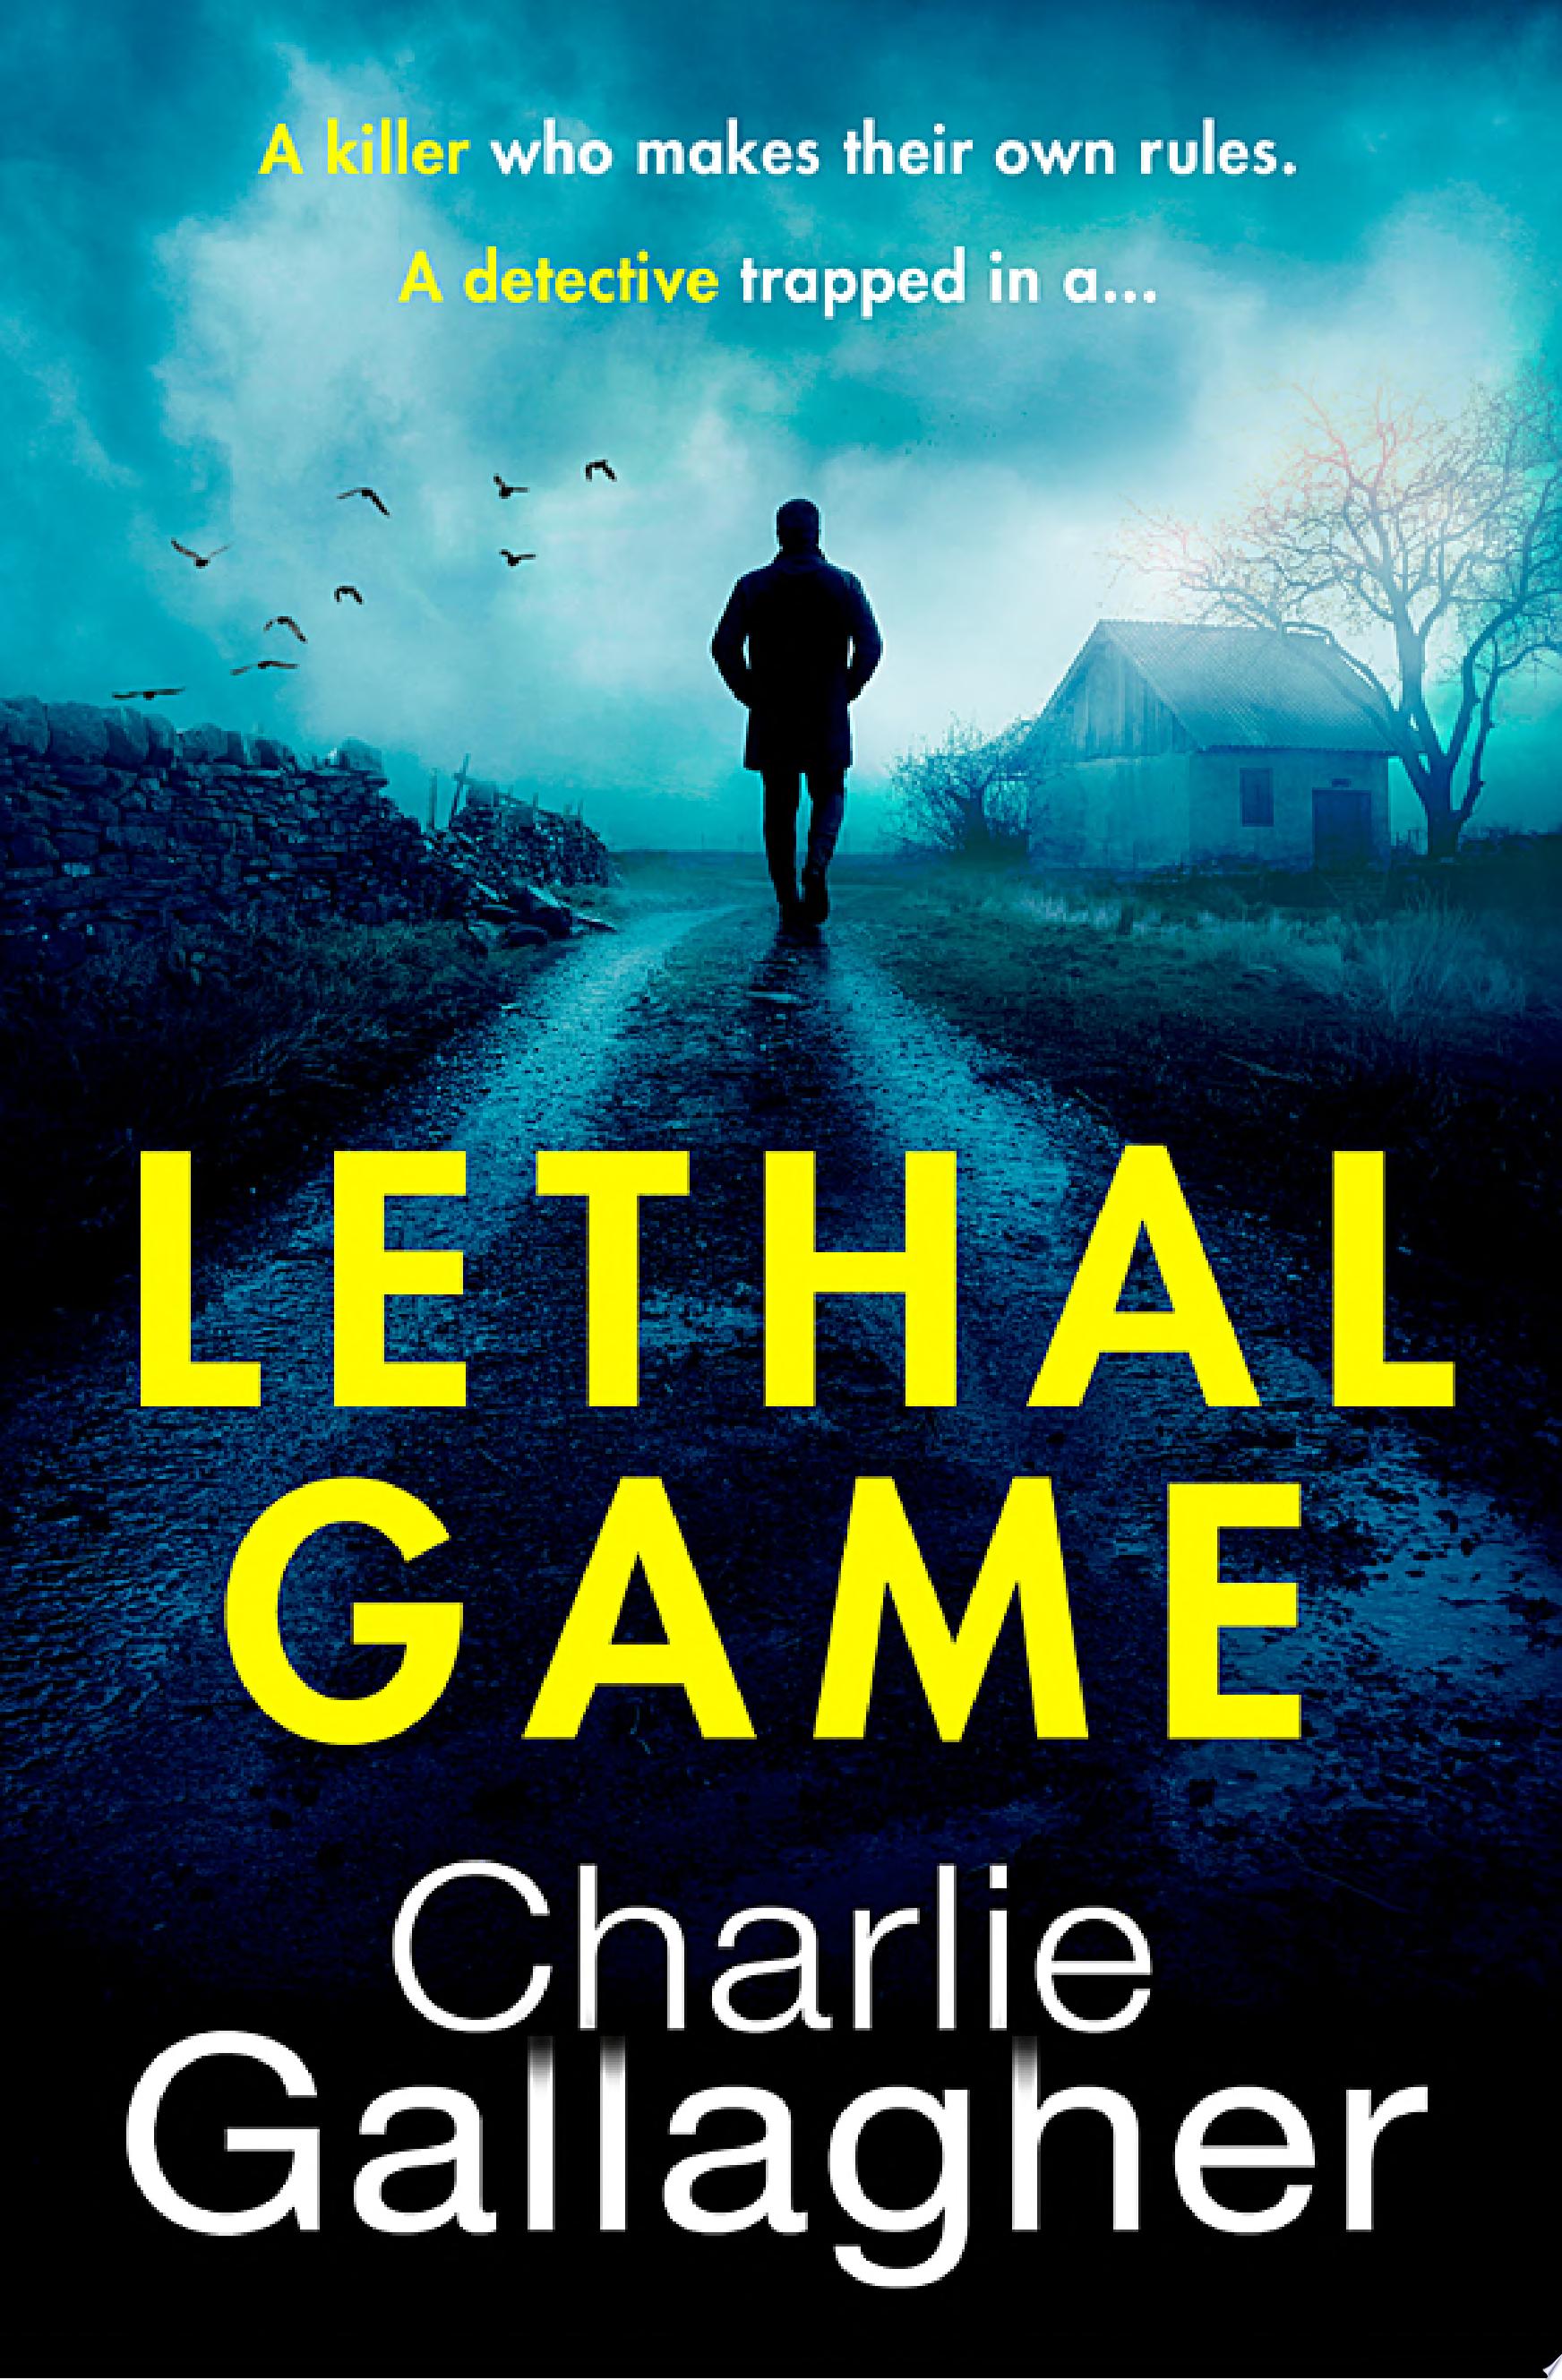 Image for "Lethal Game"